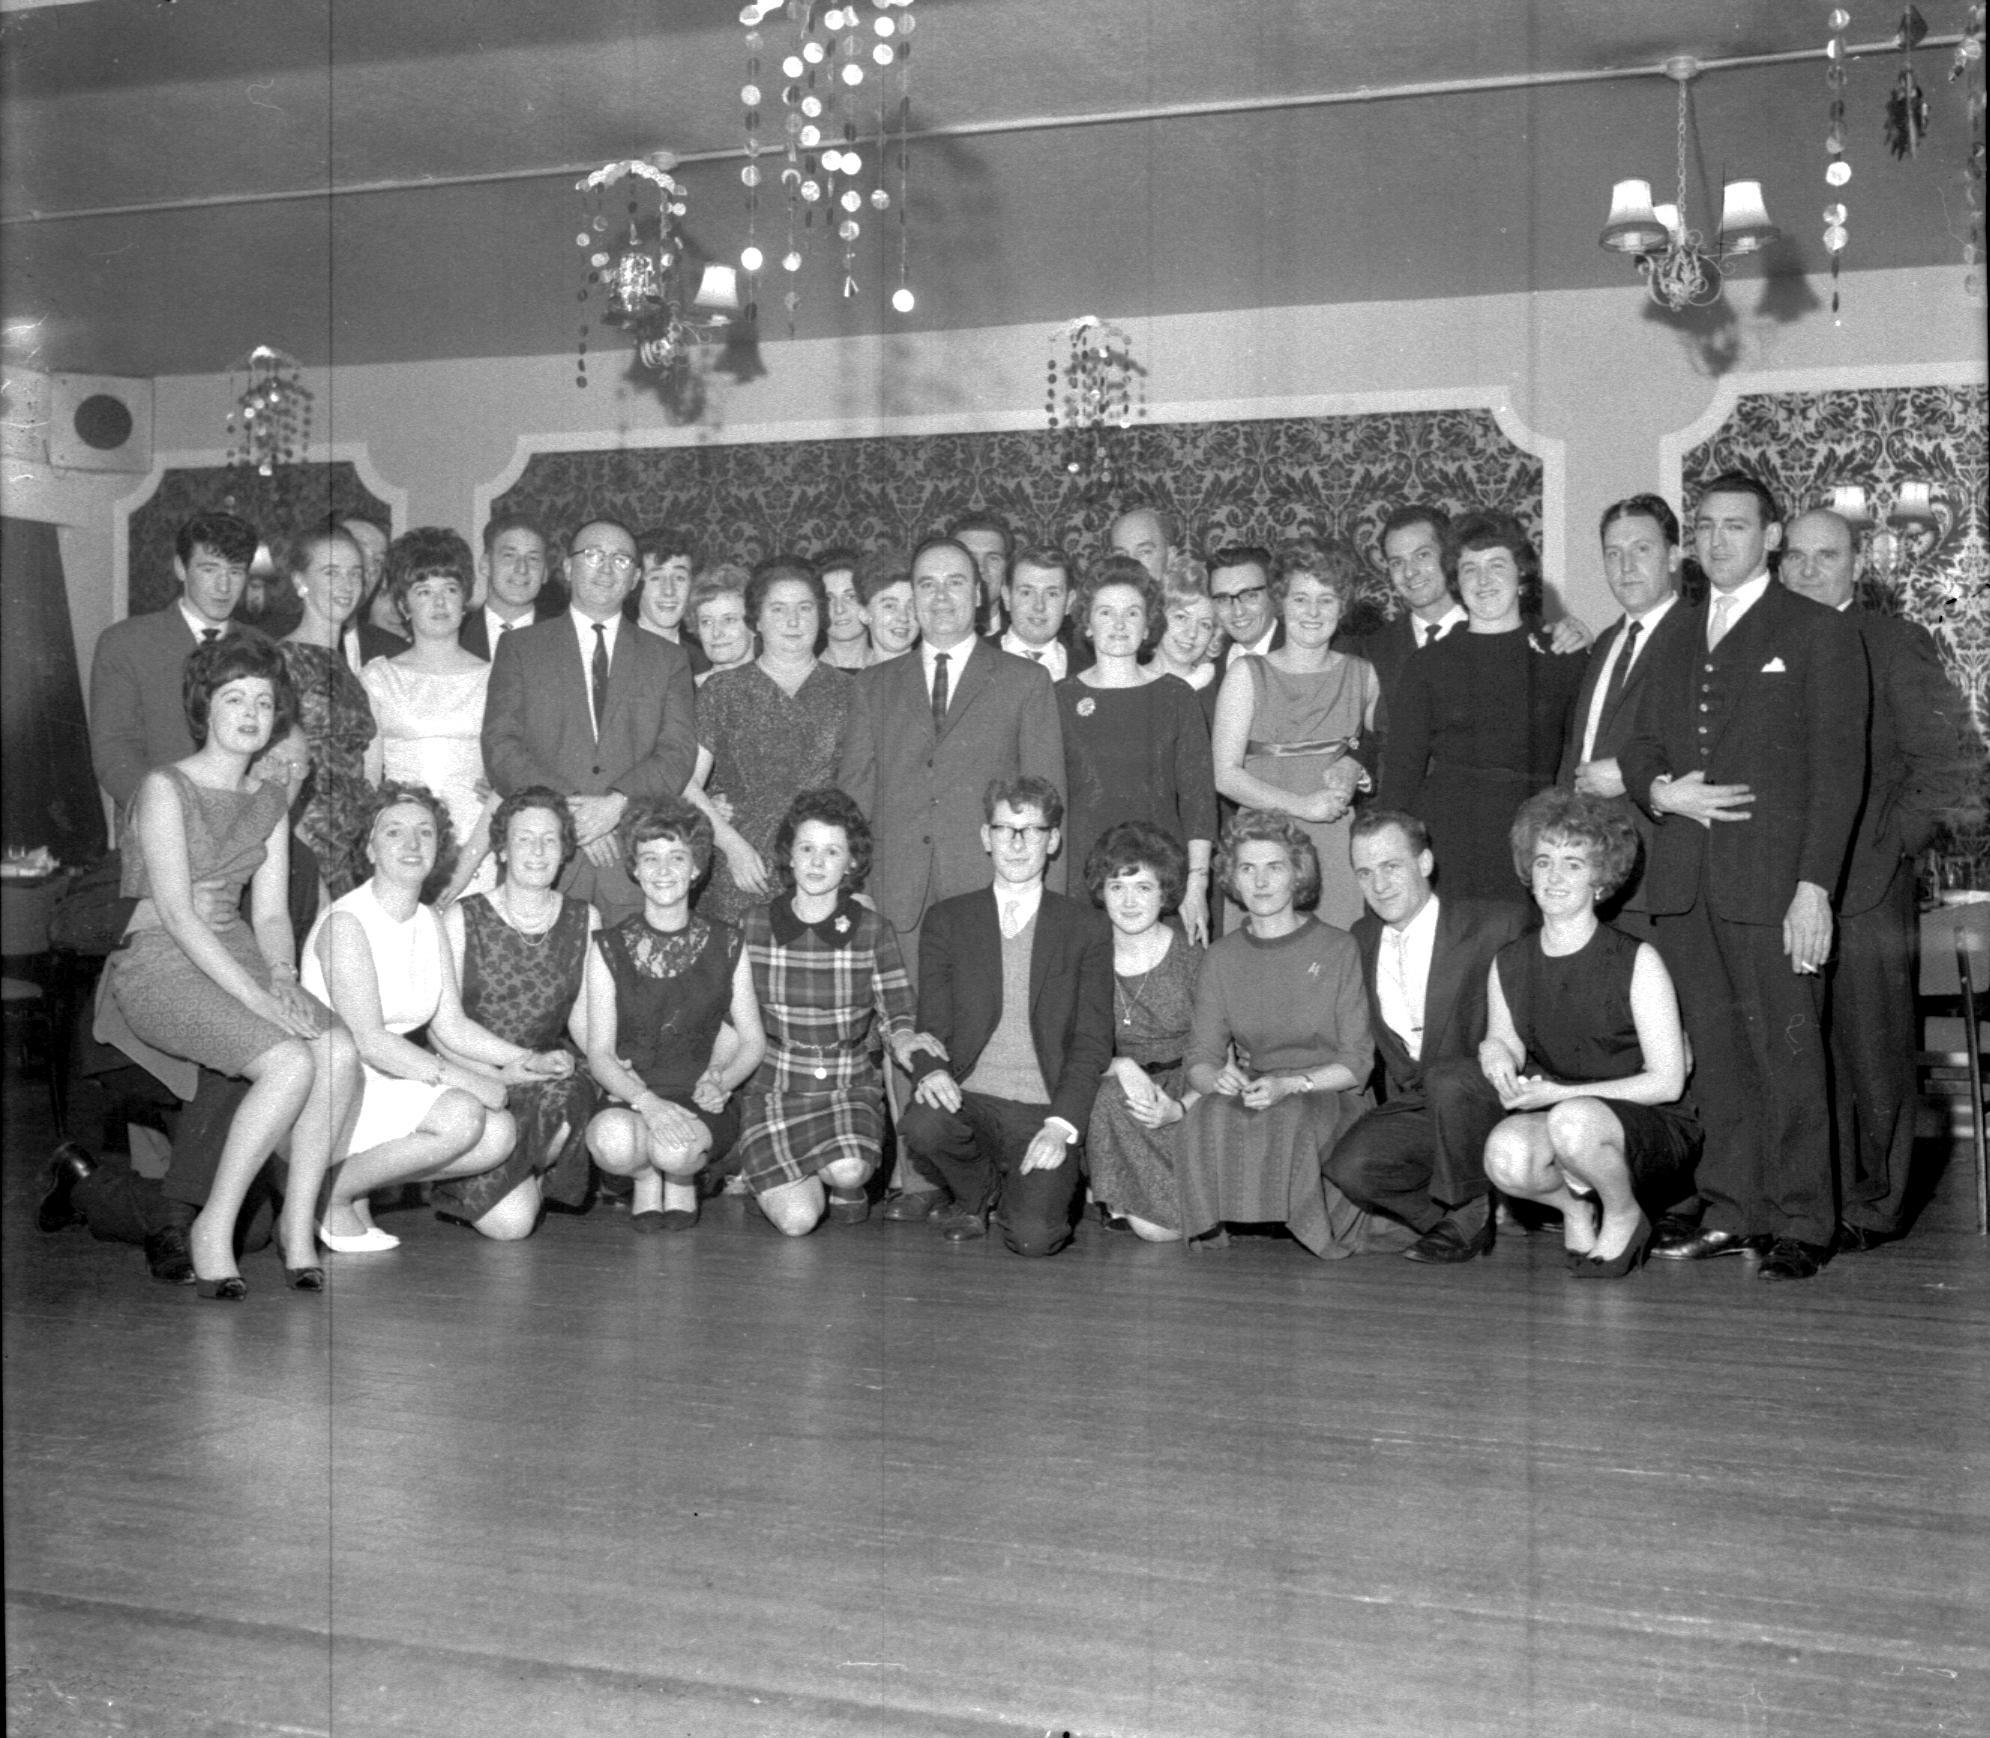 Staff from T.E. Roberts in King Street, Wrexham at their Christmas party.